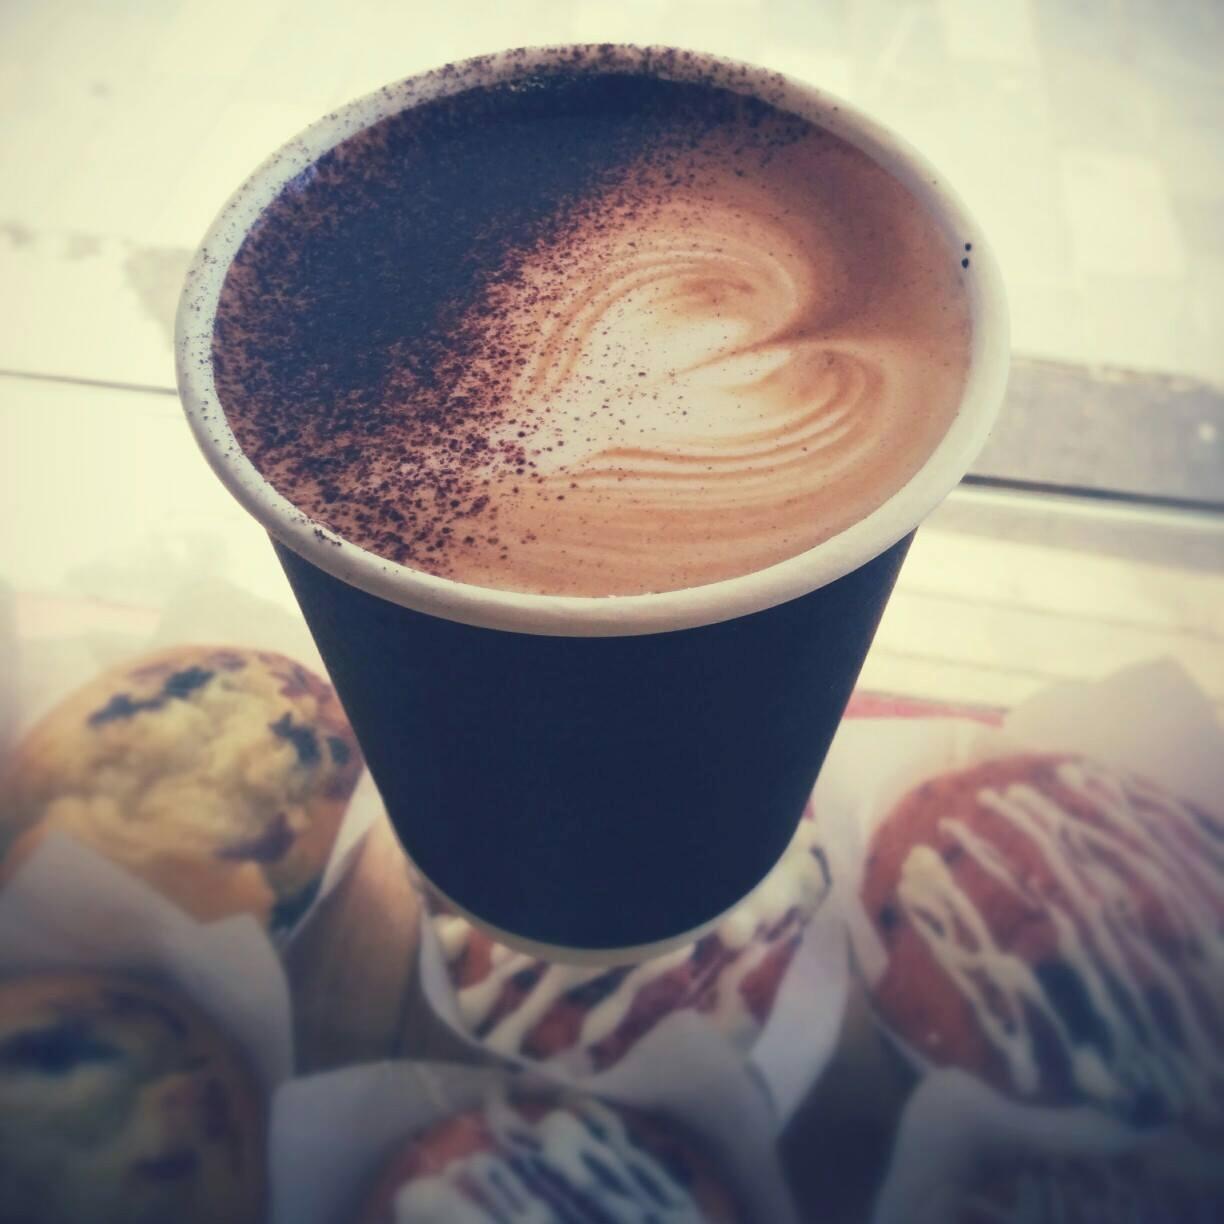 Fair trade - Fair price. $2.50 for coffee, cakes, slices and scones and more. Located at 4 Scene Lane, Britomart.